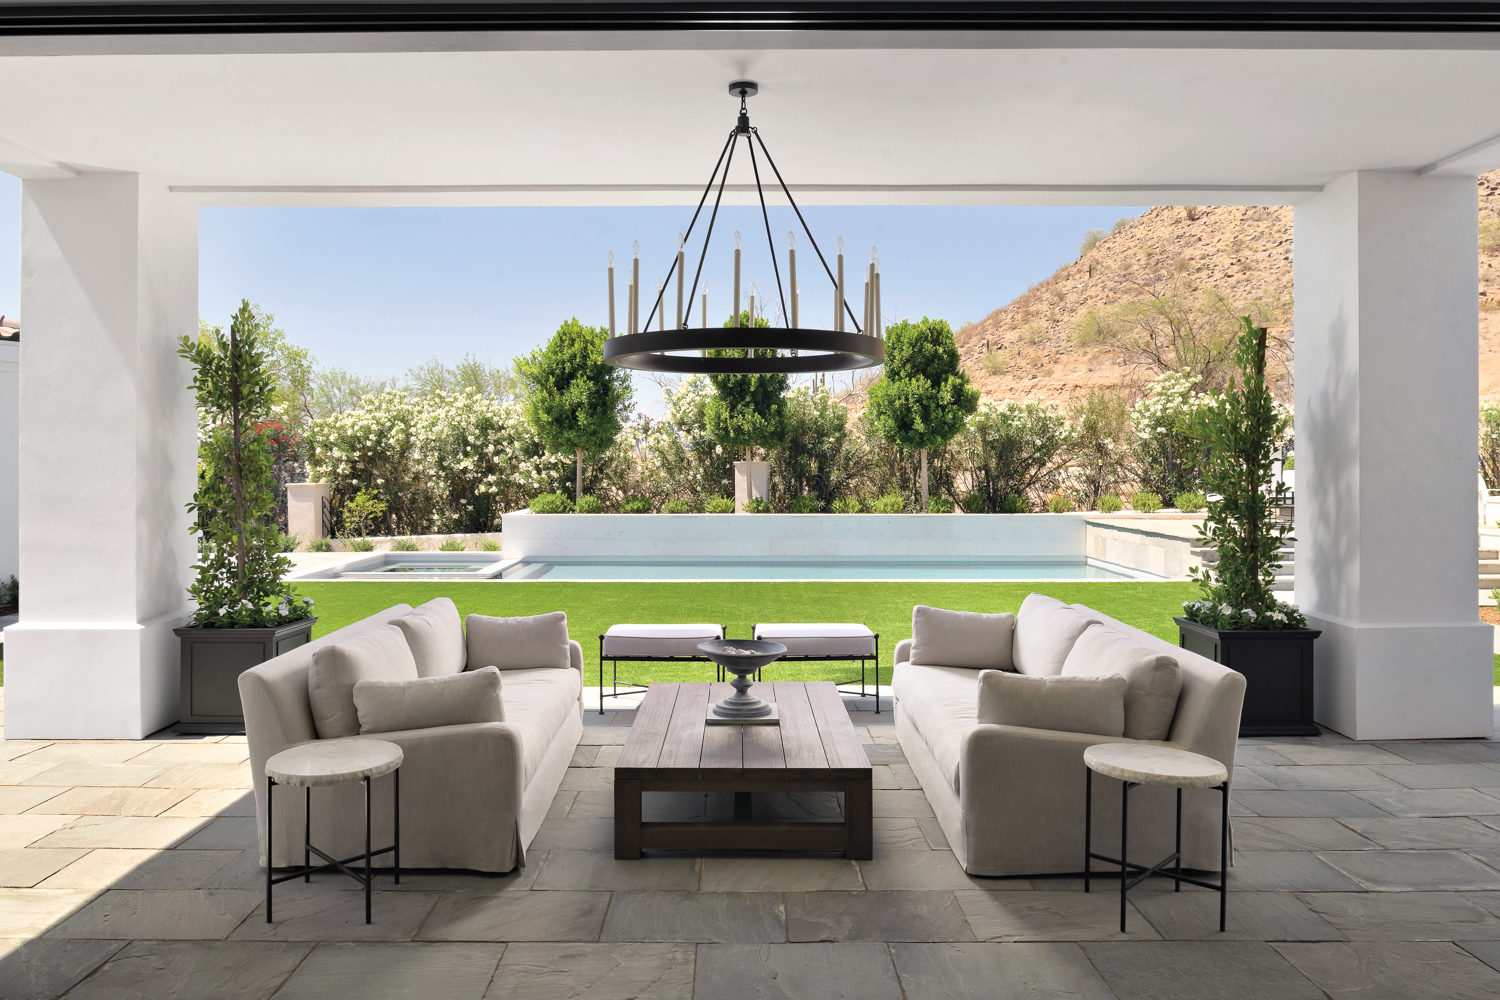 An outdoor stone patio overlooking a pool with two white couches and a coffee table.